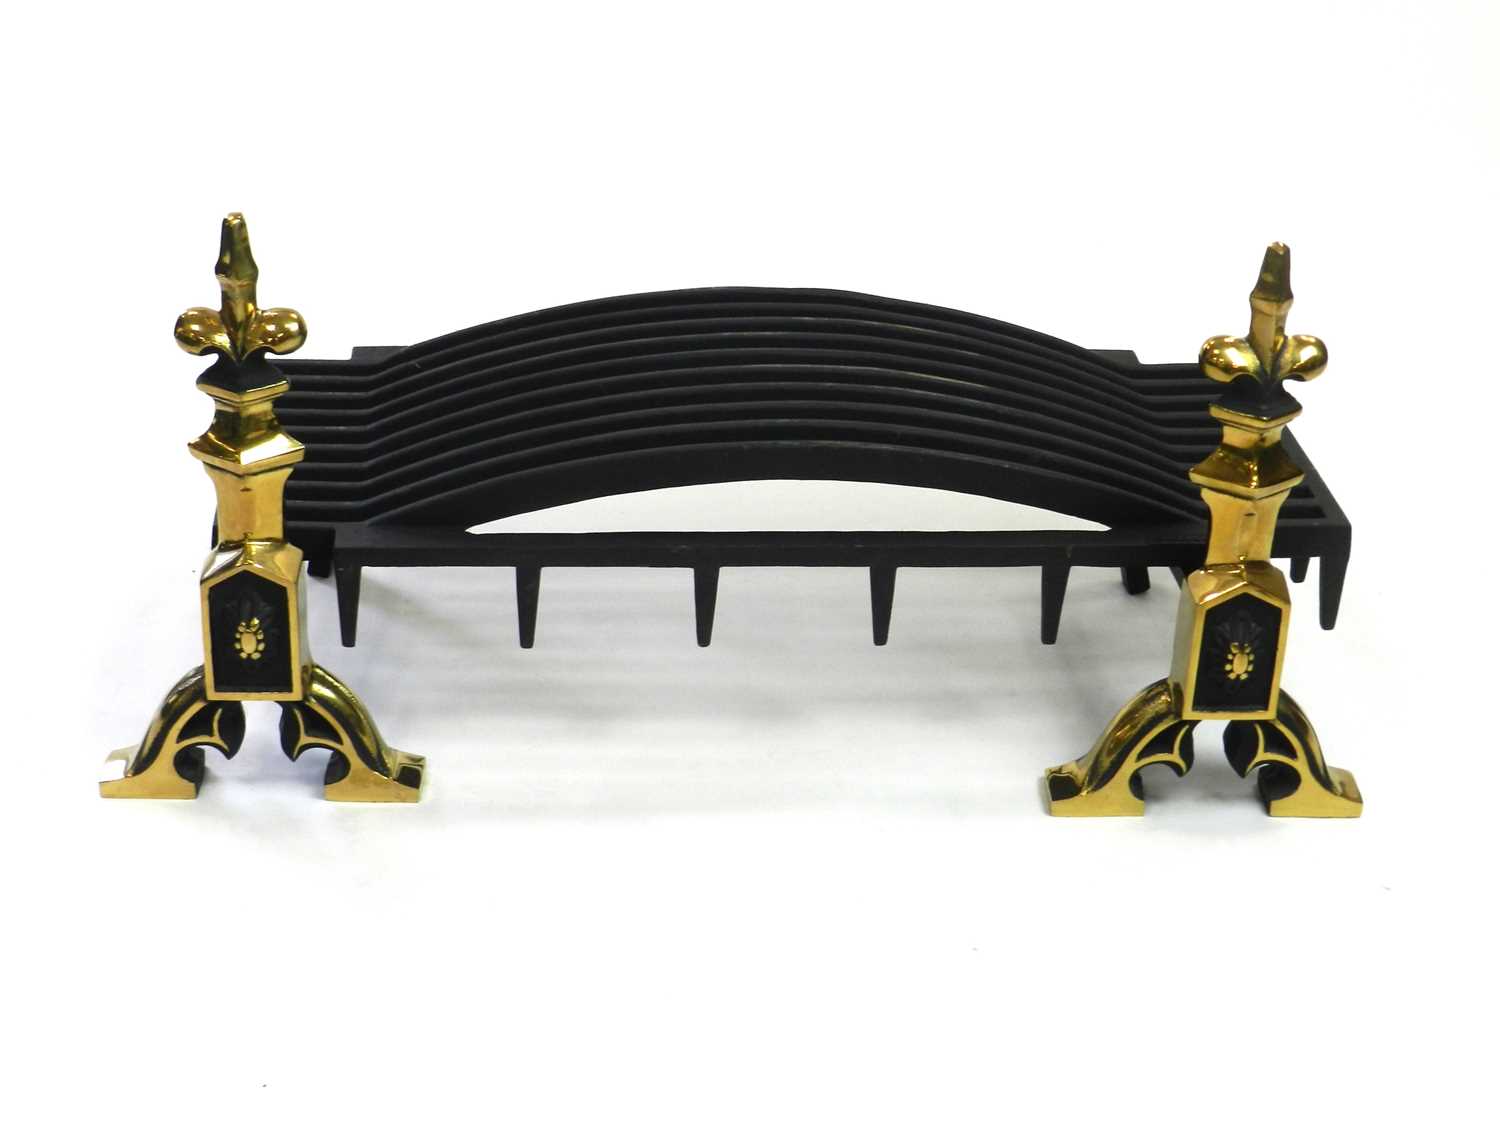 A pair of brass and cast iron fire dogs and fire grate